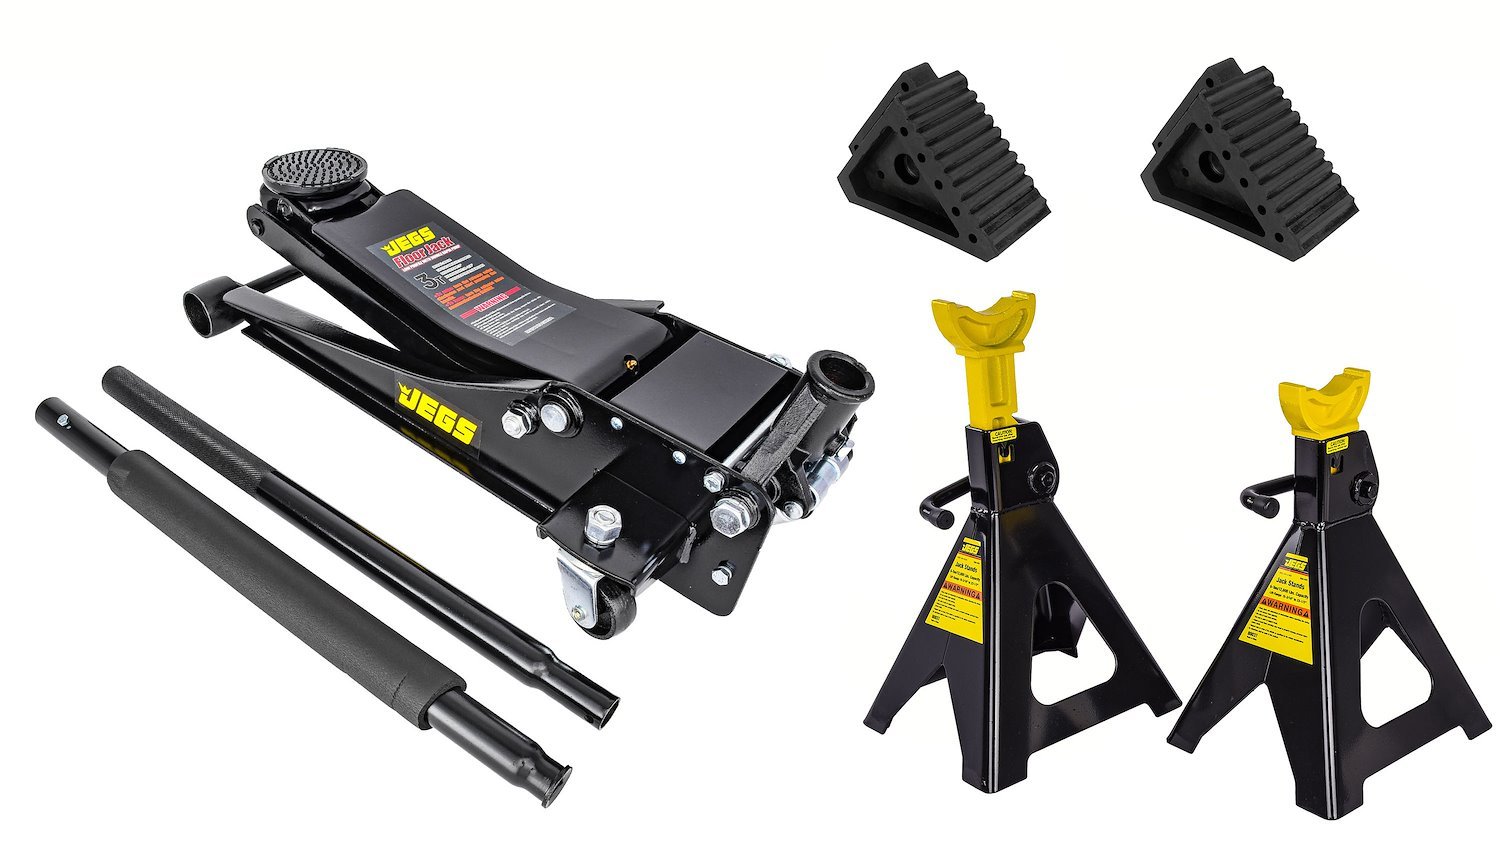 3-Ton Low-Profile Professional Floor Jack Kit with 6-Ton Capacity Jack Stands and Wheel Chocks